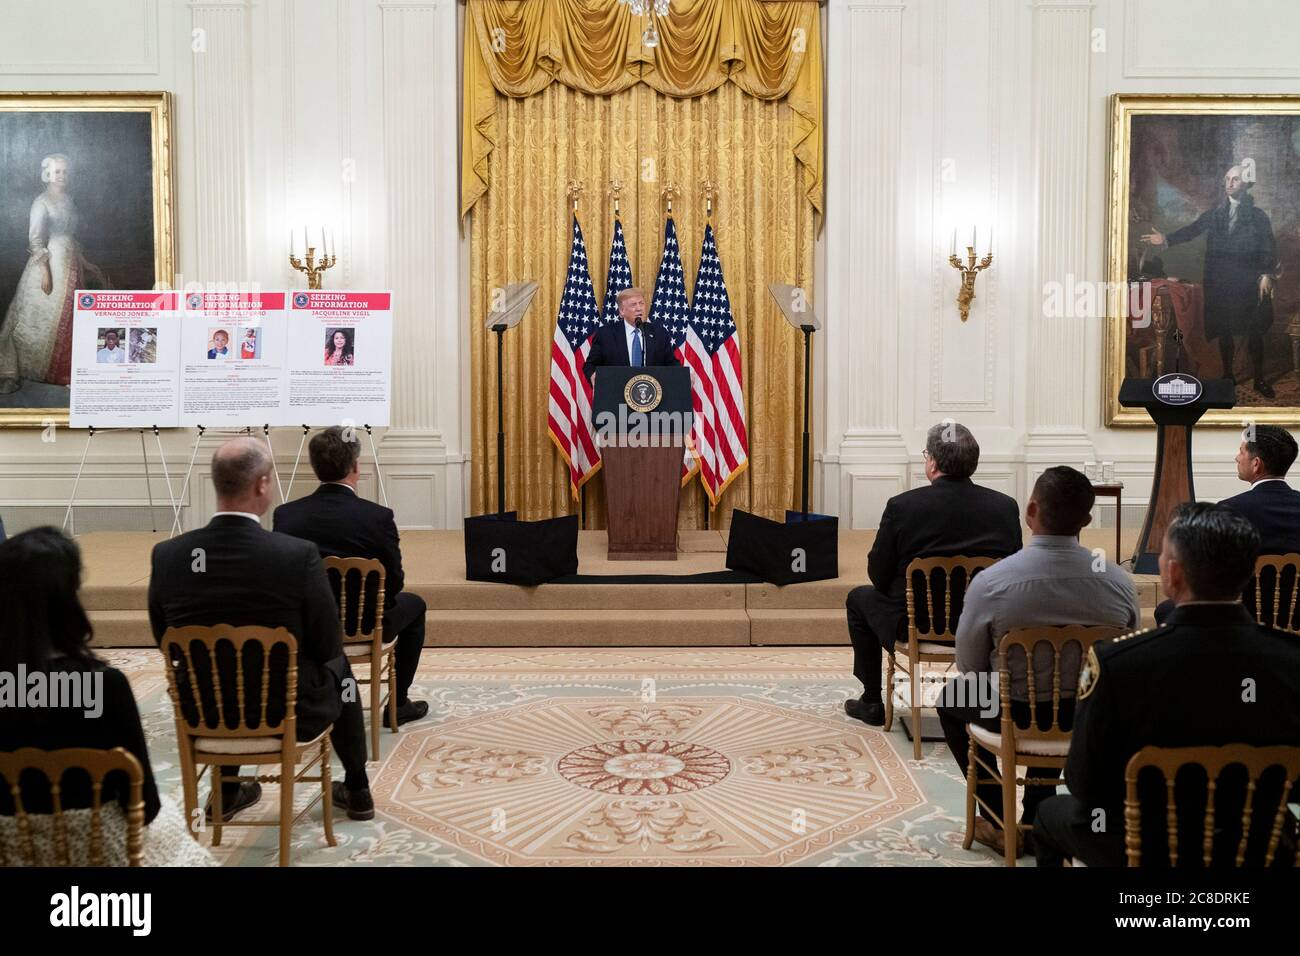 Washington, United States Of America. 22nd July, 2020. Washington, United States of America. 22 July, 2020. U.S. President Donald Trump announces Operation Legend, to combat violent crime in the East Room of the White House July 22, 2020 in Washington, DC Trump plans to send federal law enforcement to cities around the country in what is widely viewed as an attempt to suppress Black Lives Matter protests. Credit: Shealah Craighead/White House Photo/Alamy Live News Stock Photo